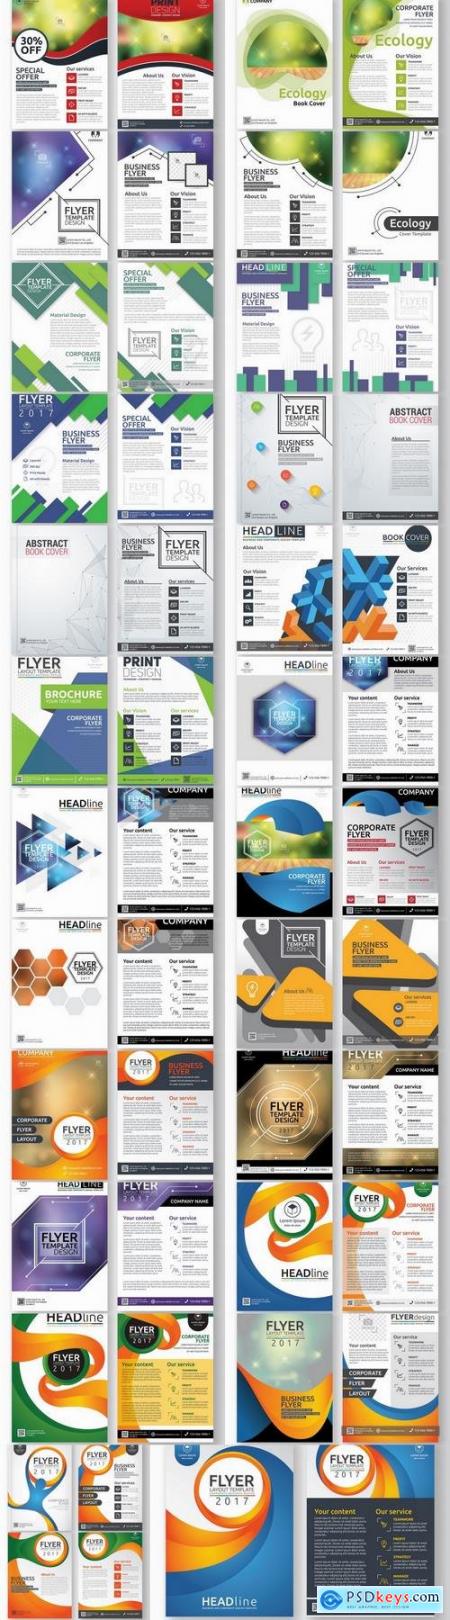 Book cover template log example flyer banner vector image 4-25 EPS